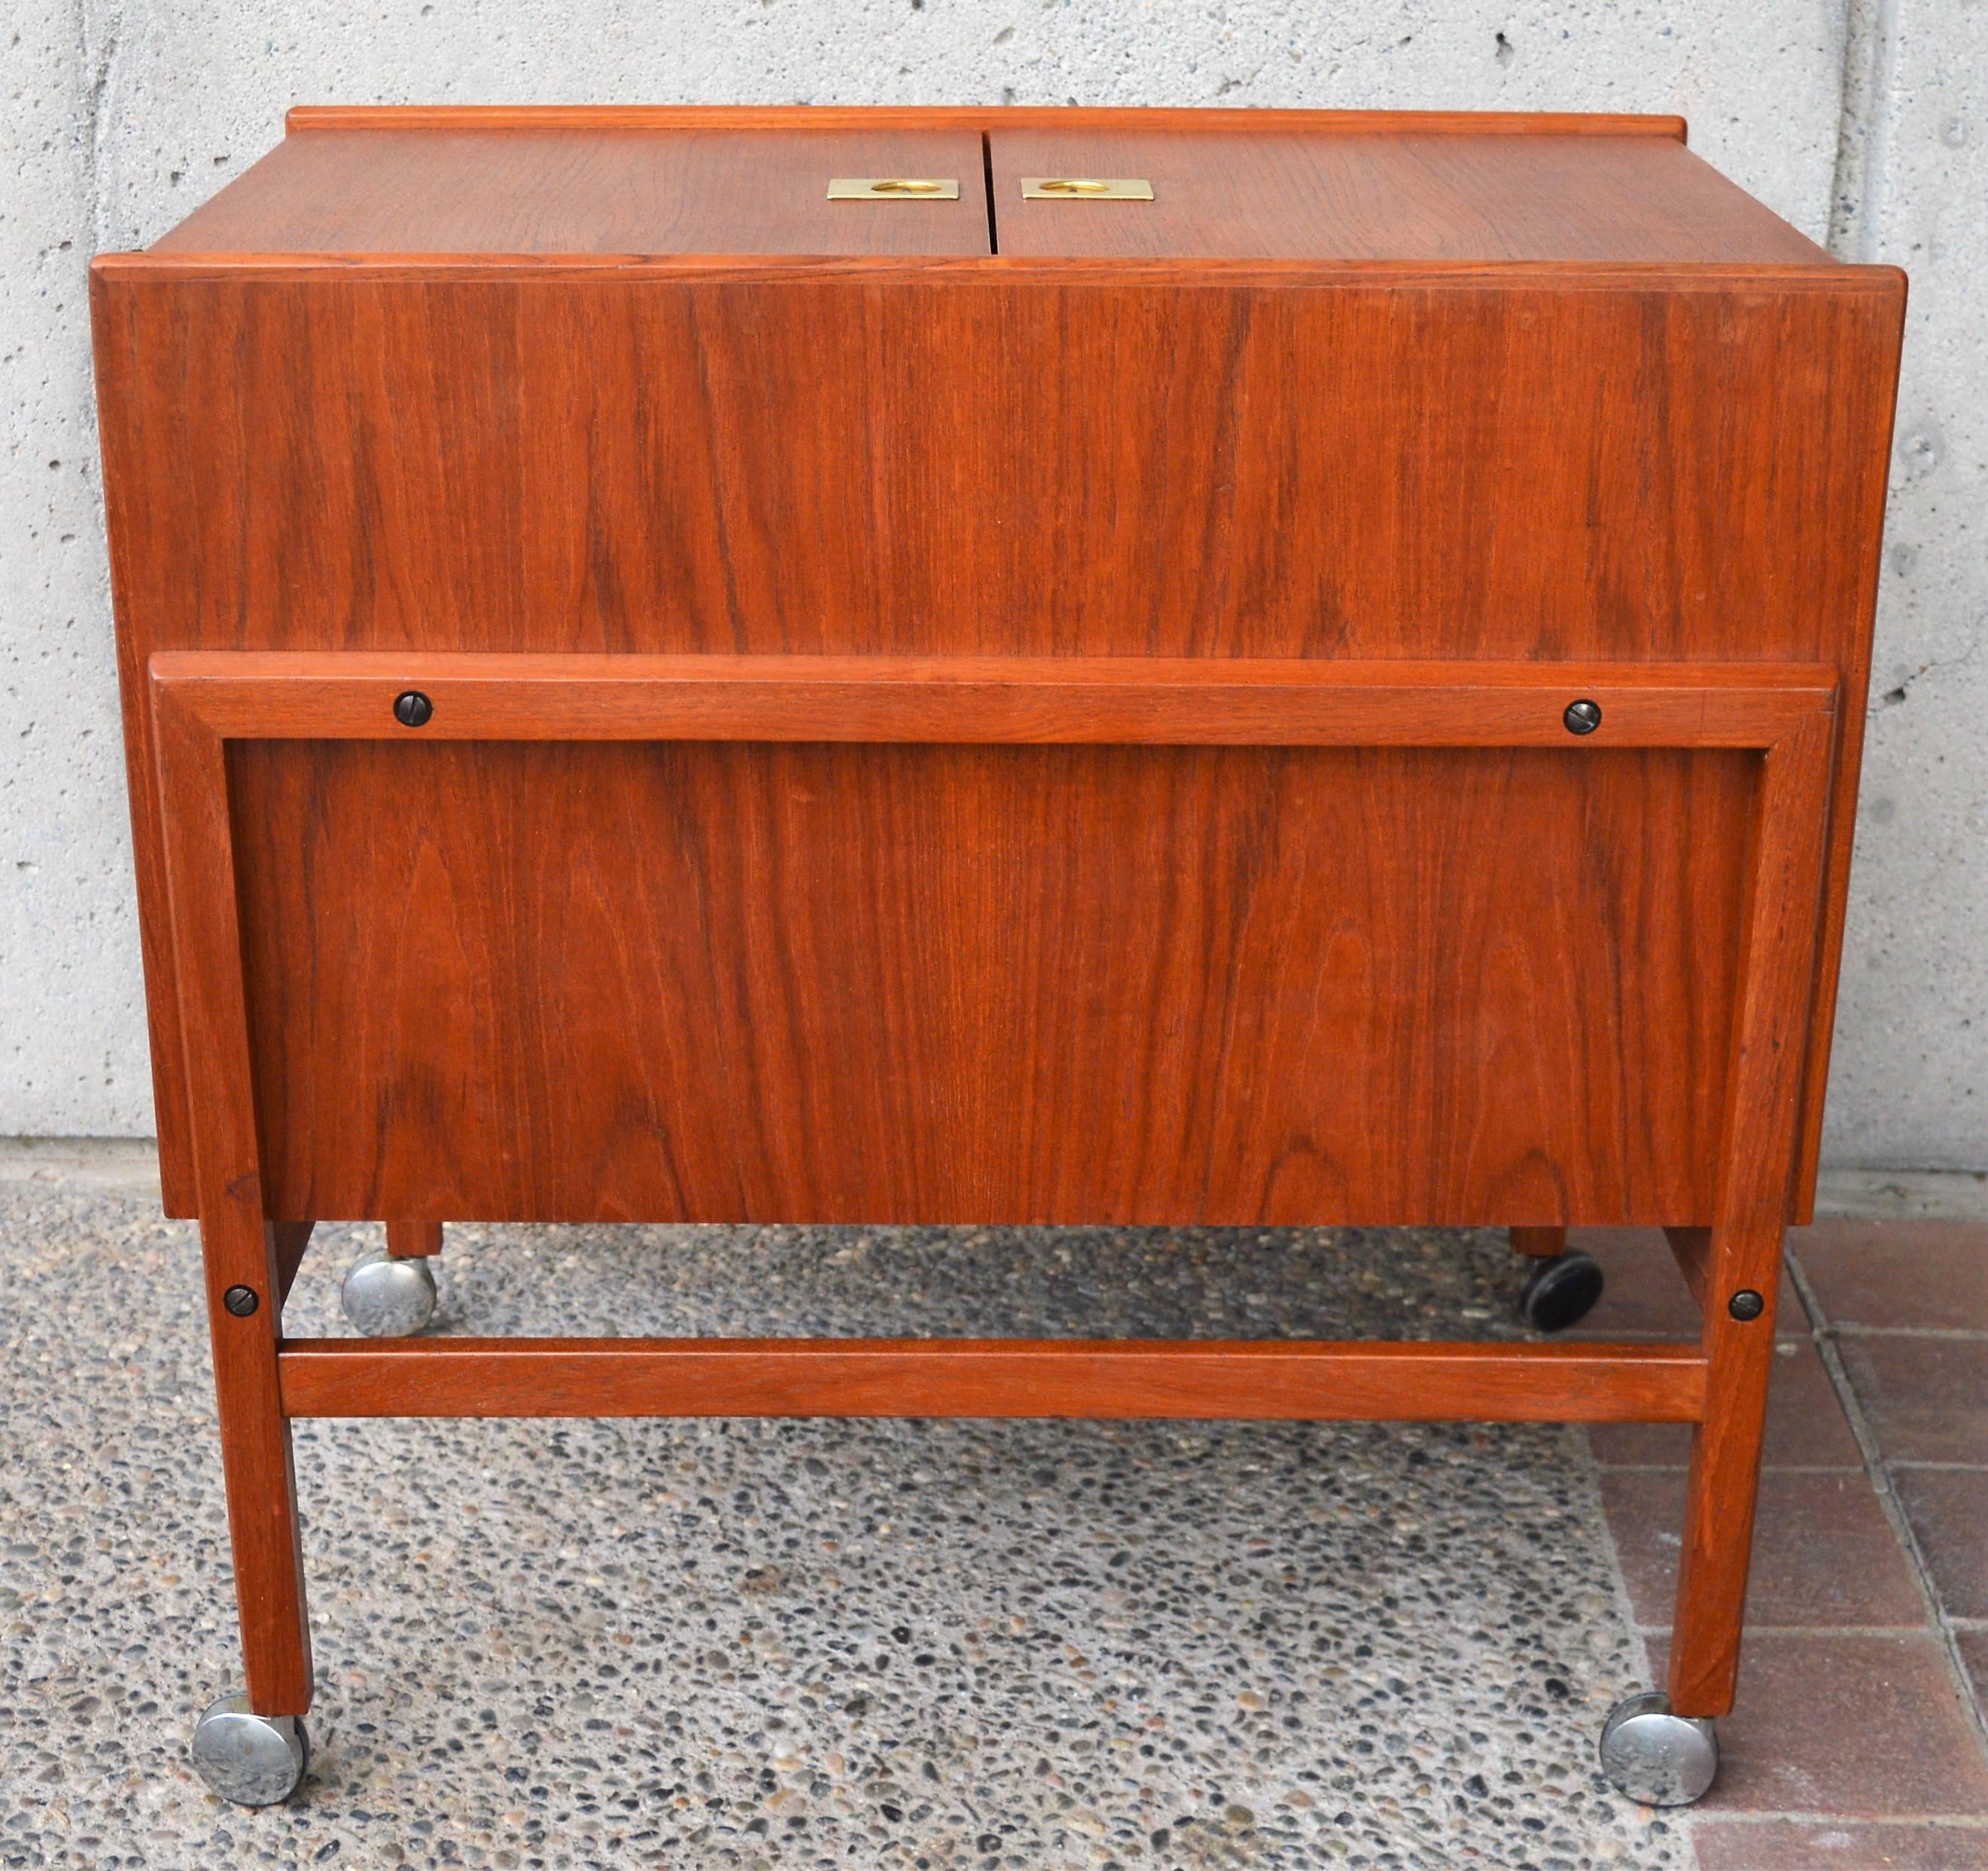 Mid-20th Century Danish Teak and Brass Bar Cabinet on Casters with Bottle and Glass Storage